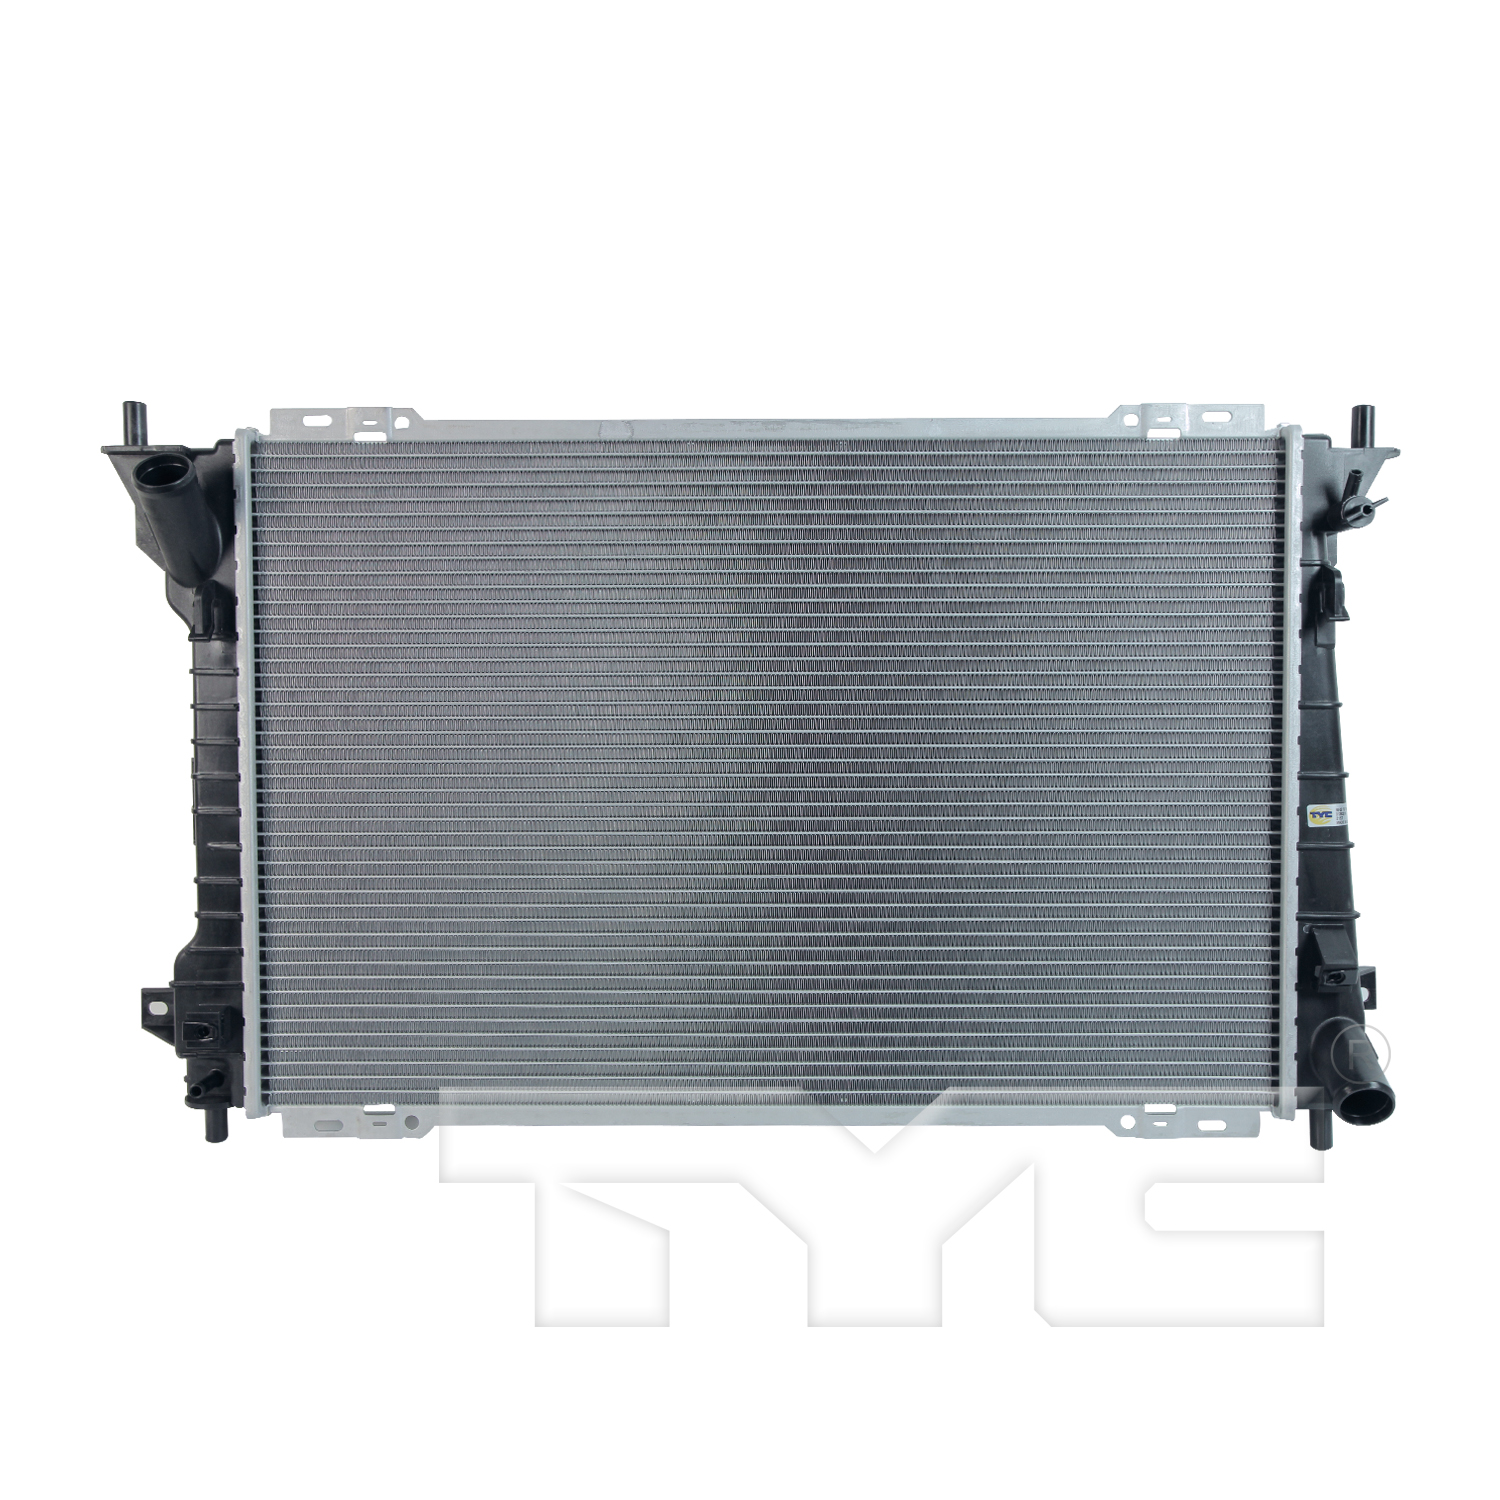 Aftermarket RADIATORS for MERCURY - GRAND MARQUIS, GRAND MARQUIS,98-02,Radiator assembly